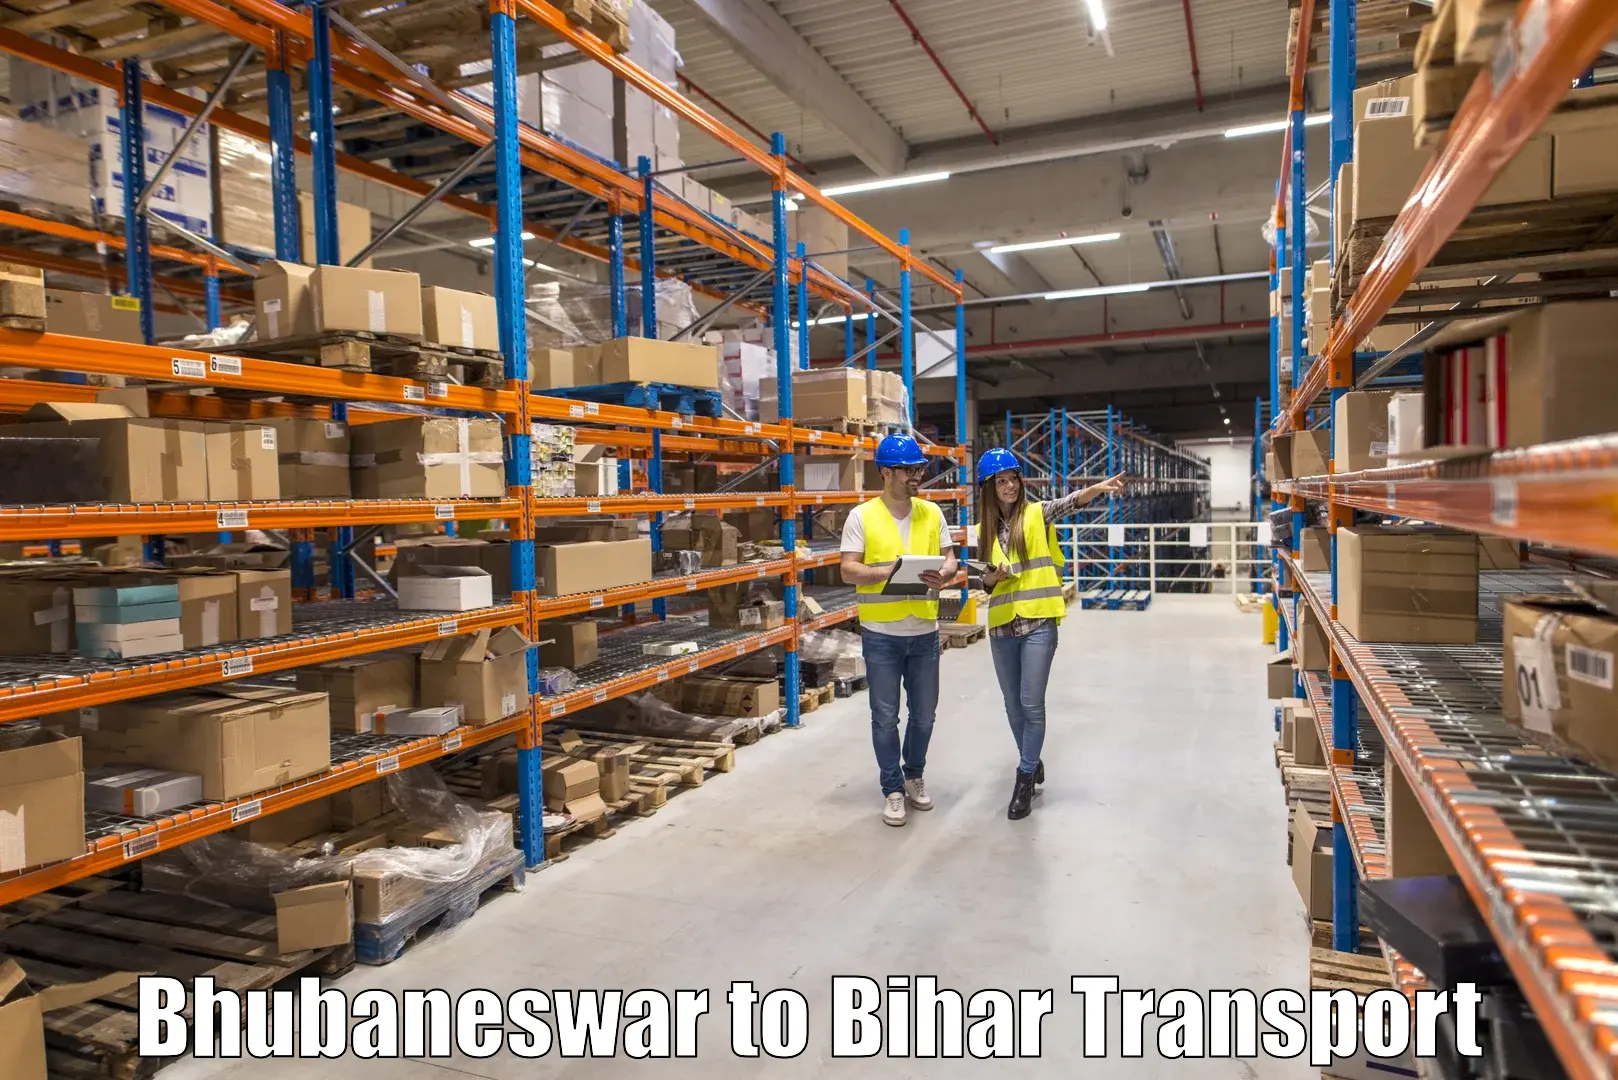 Delivery service Bhubaneswar to Buxar